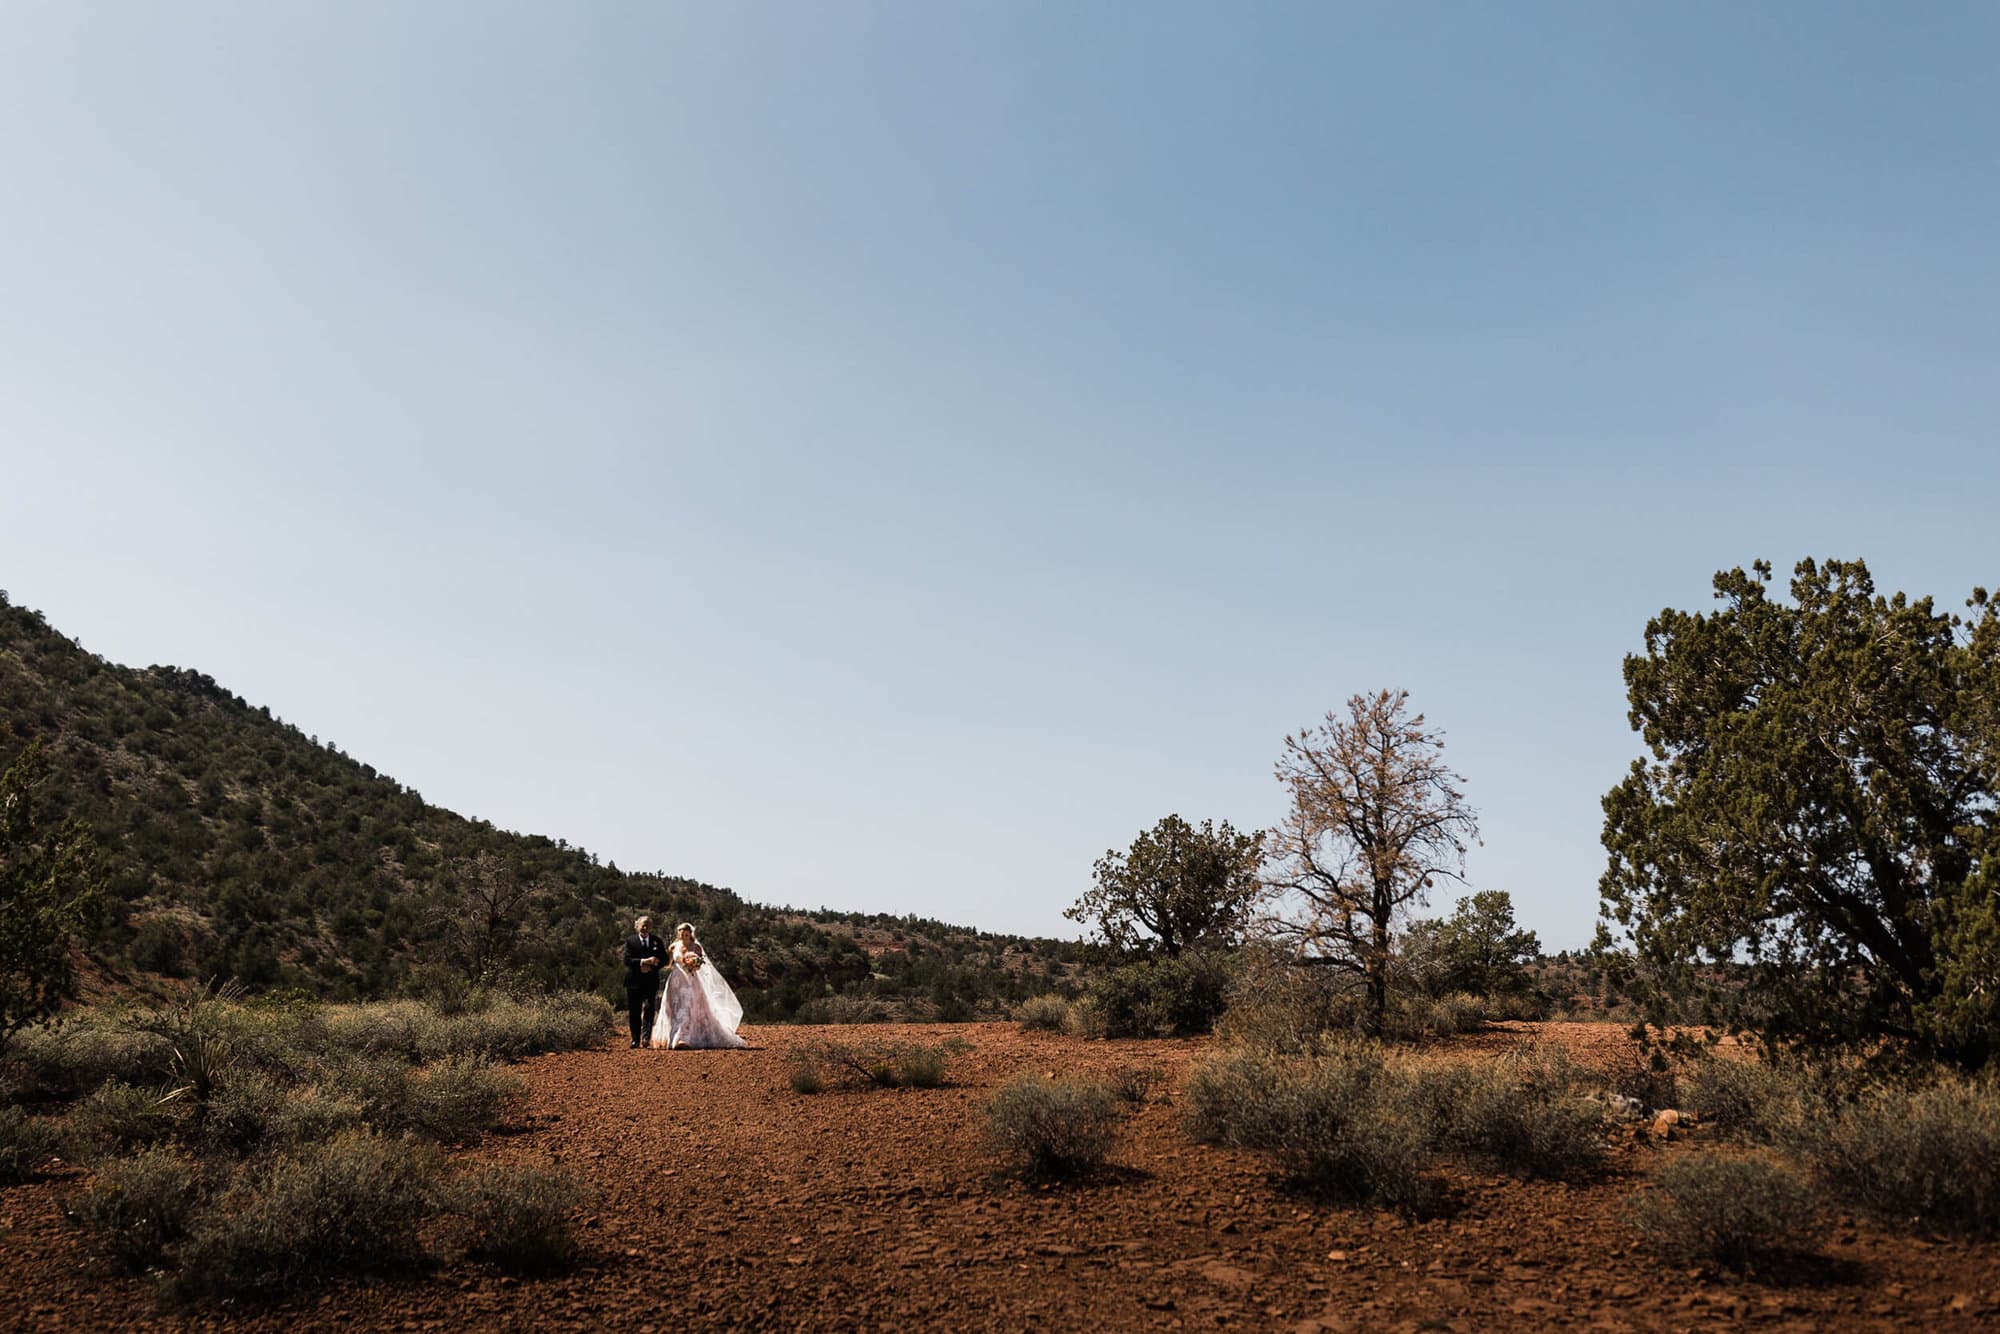 Springtime in Sedona is pure magic, and this super intentional and lovely Sedona Micro Wedding was full of sweet family moments and red rock adventure. 